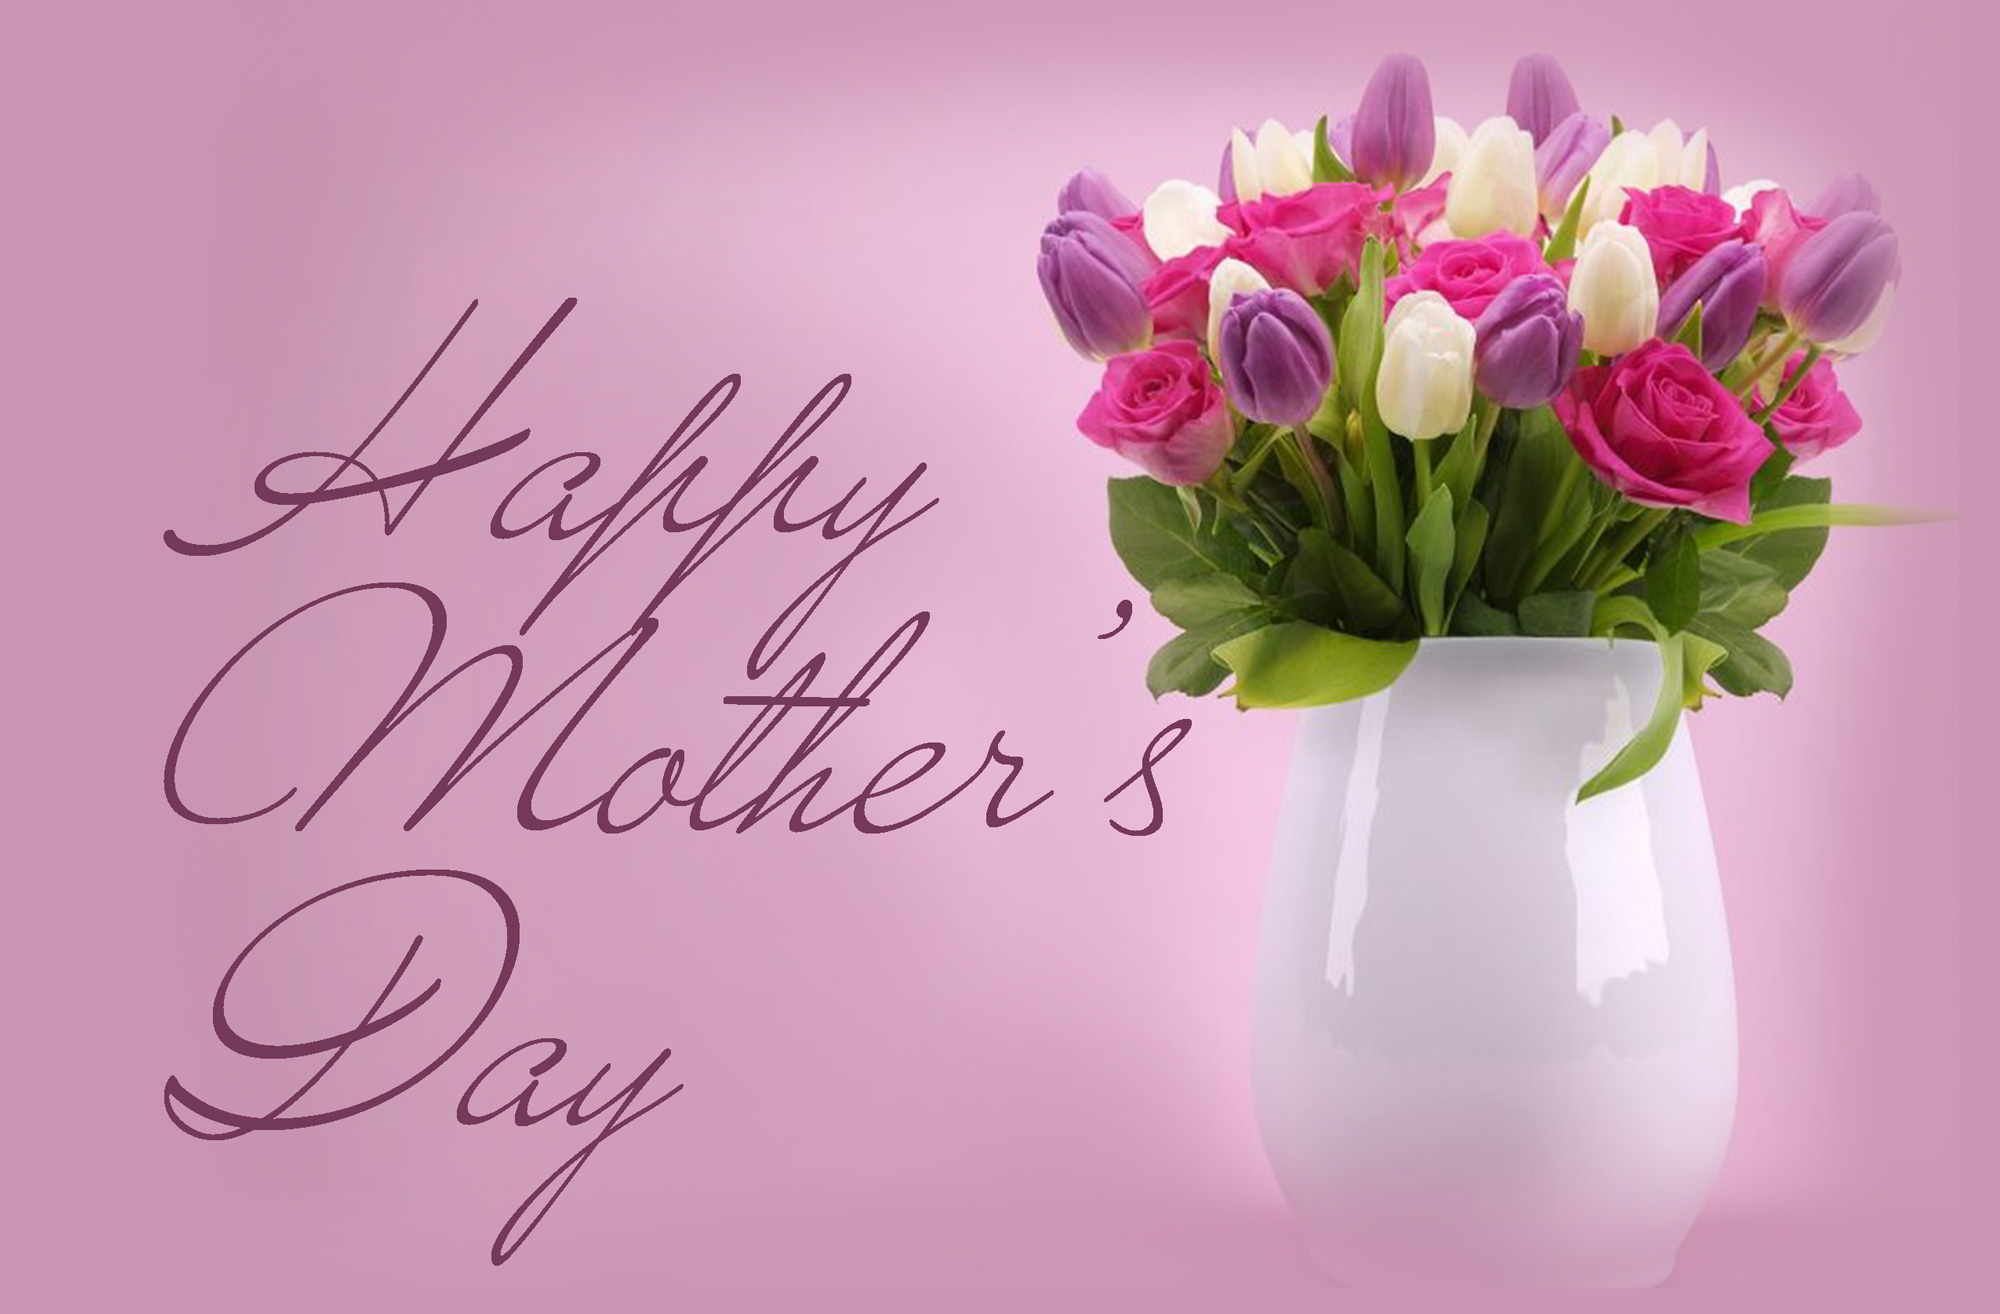 Happy Mothers Day from everyone at Delgatie Castle